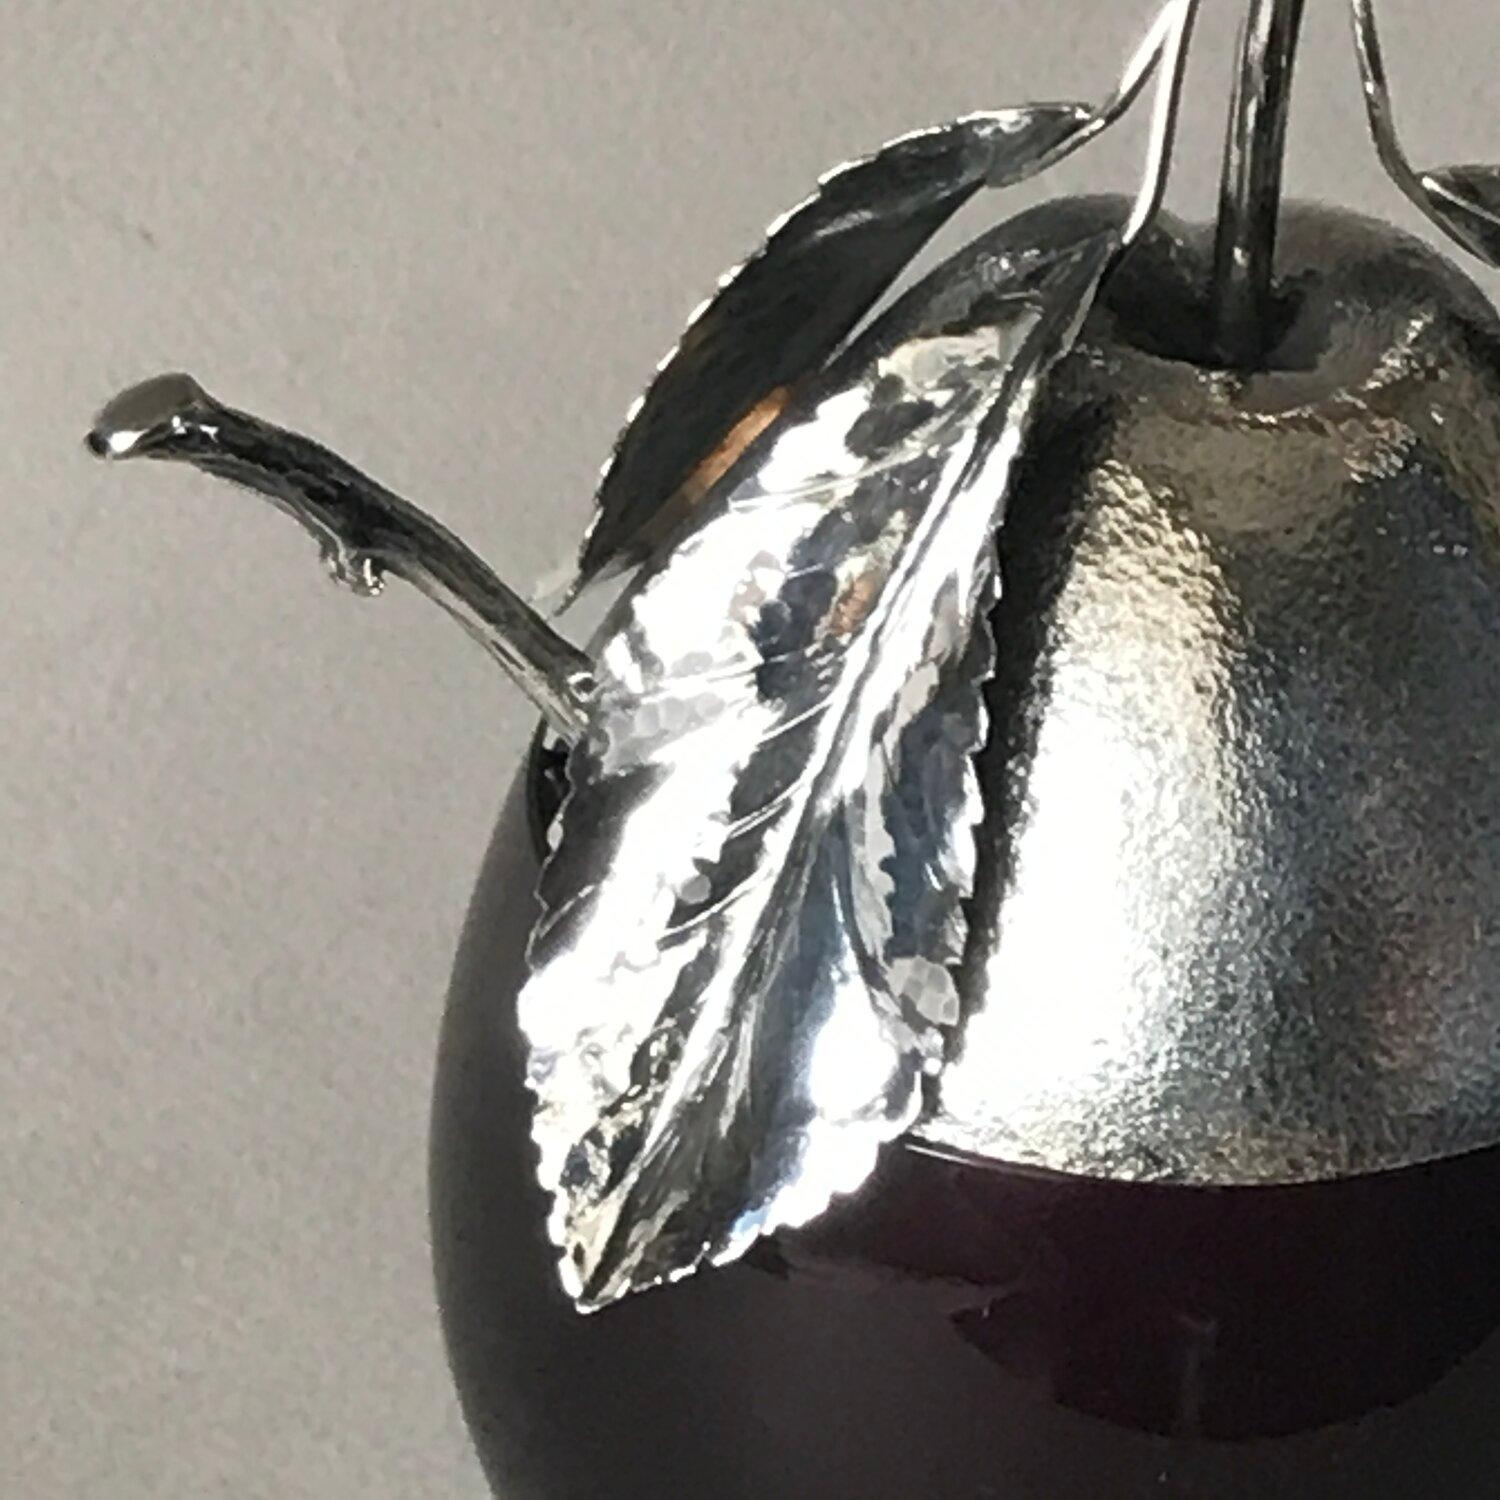 Buccellati sterling silver jam jar with spoon

Special Order only. 2-3 months delivery.

Handblown Murano glass

Stylish plum handmade sterling silver top with textured surface with handing engraving.

Contemporary piece

Available for special